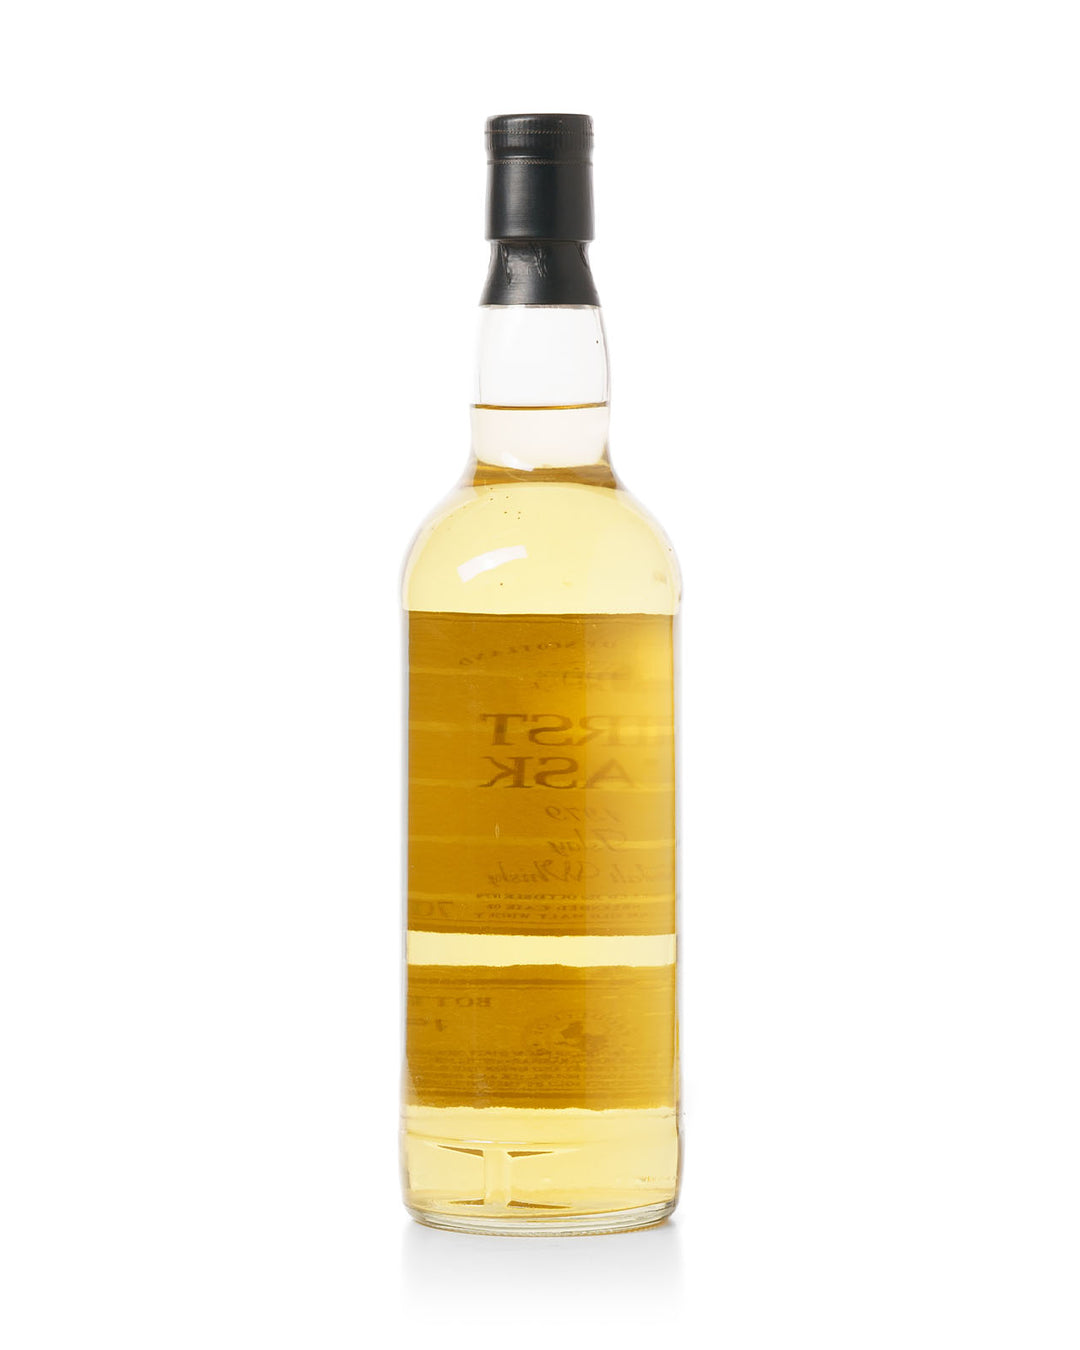 Bruichladdich 1967 32 Year Old First Cask Bottled 1999